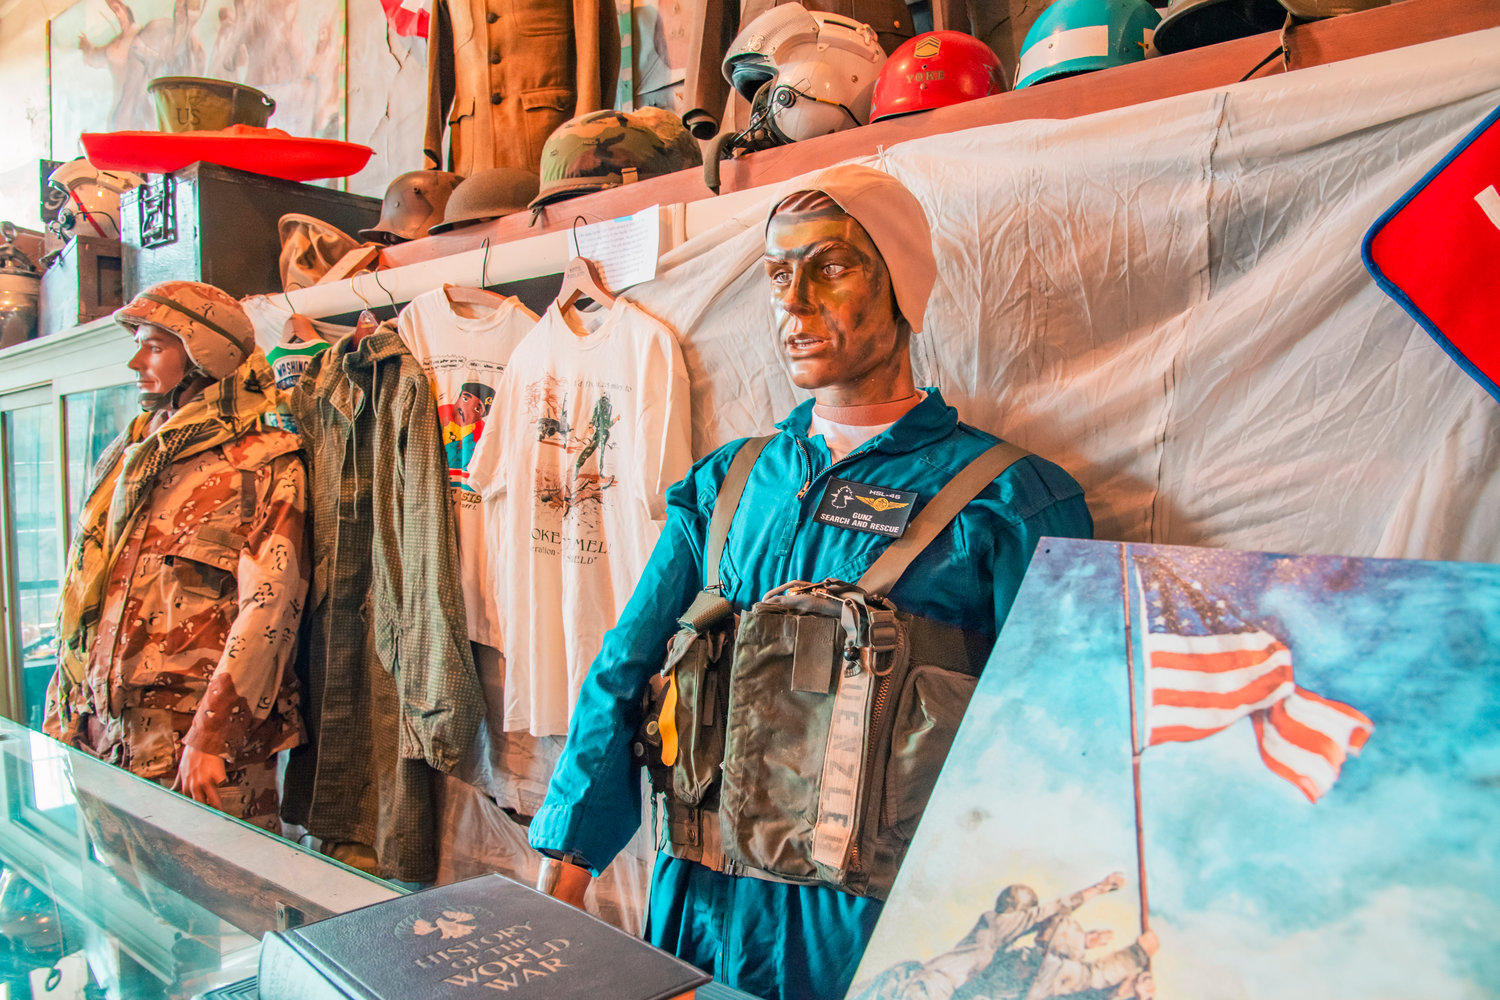 A flight suit worn by Brian Guenzler of Centralia is seen on display inside the America’s Team Military Museum on Saturday during Armed Forces Day.